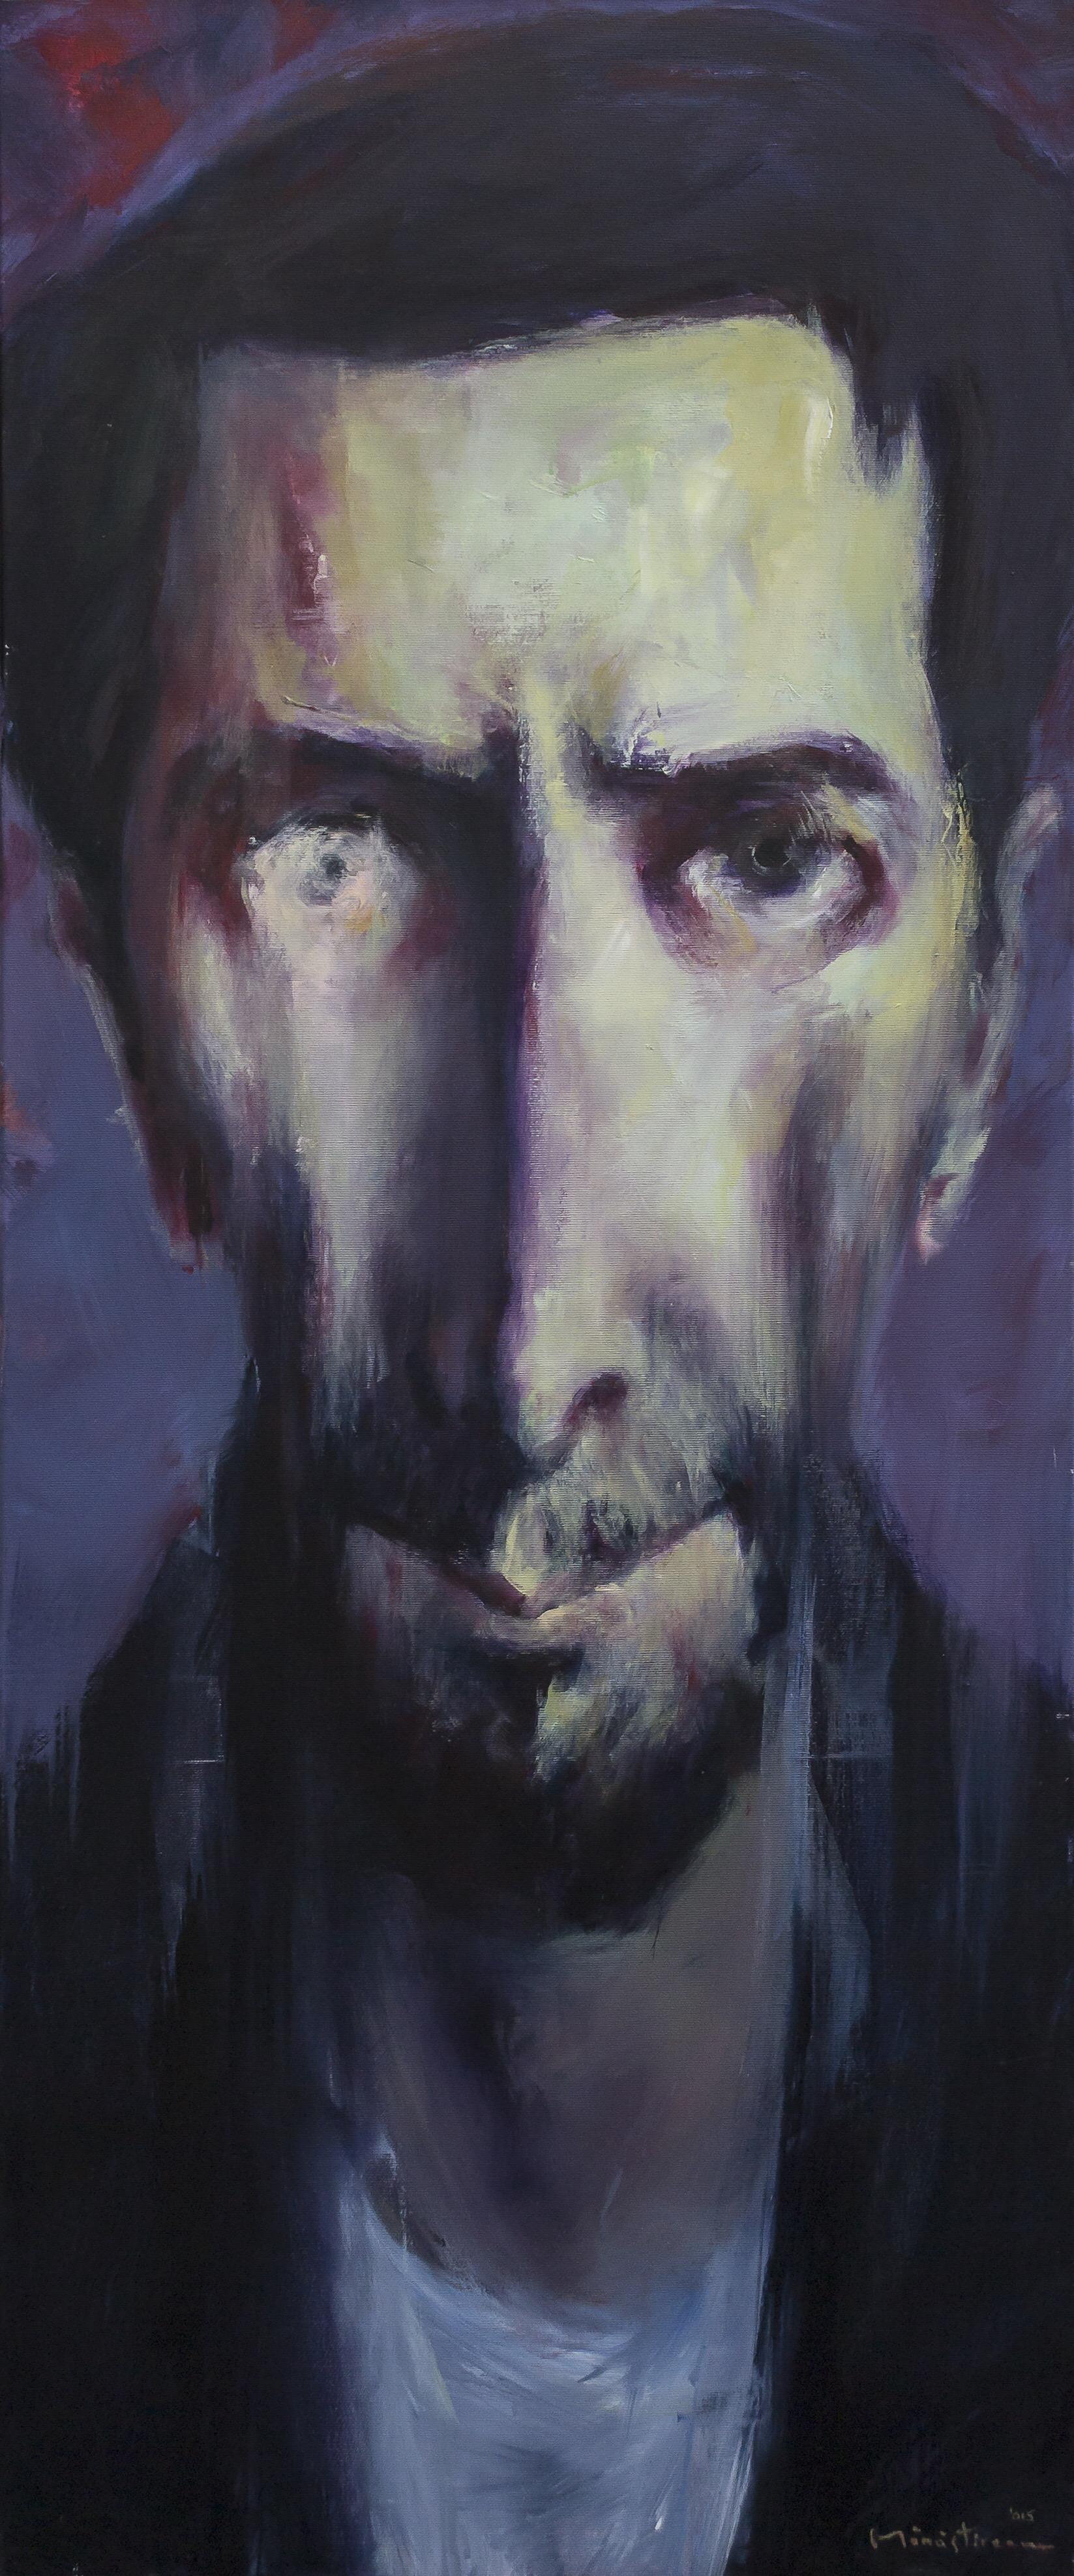 Emanuell is a Romanian contemporary artist, and member of the Union of Artists of Romania since 2001. His work was exhibited in London, Brussels, Bucharest and around Romania and the UK. This portrait is of Luchian - famous Romanian painter. 